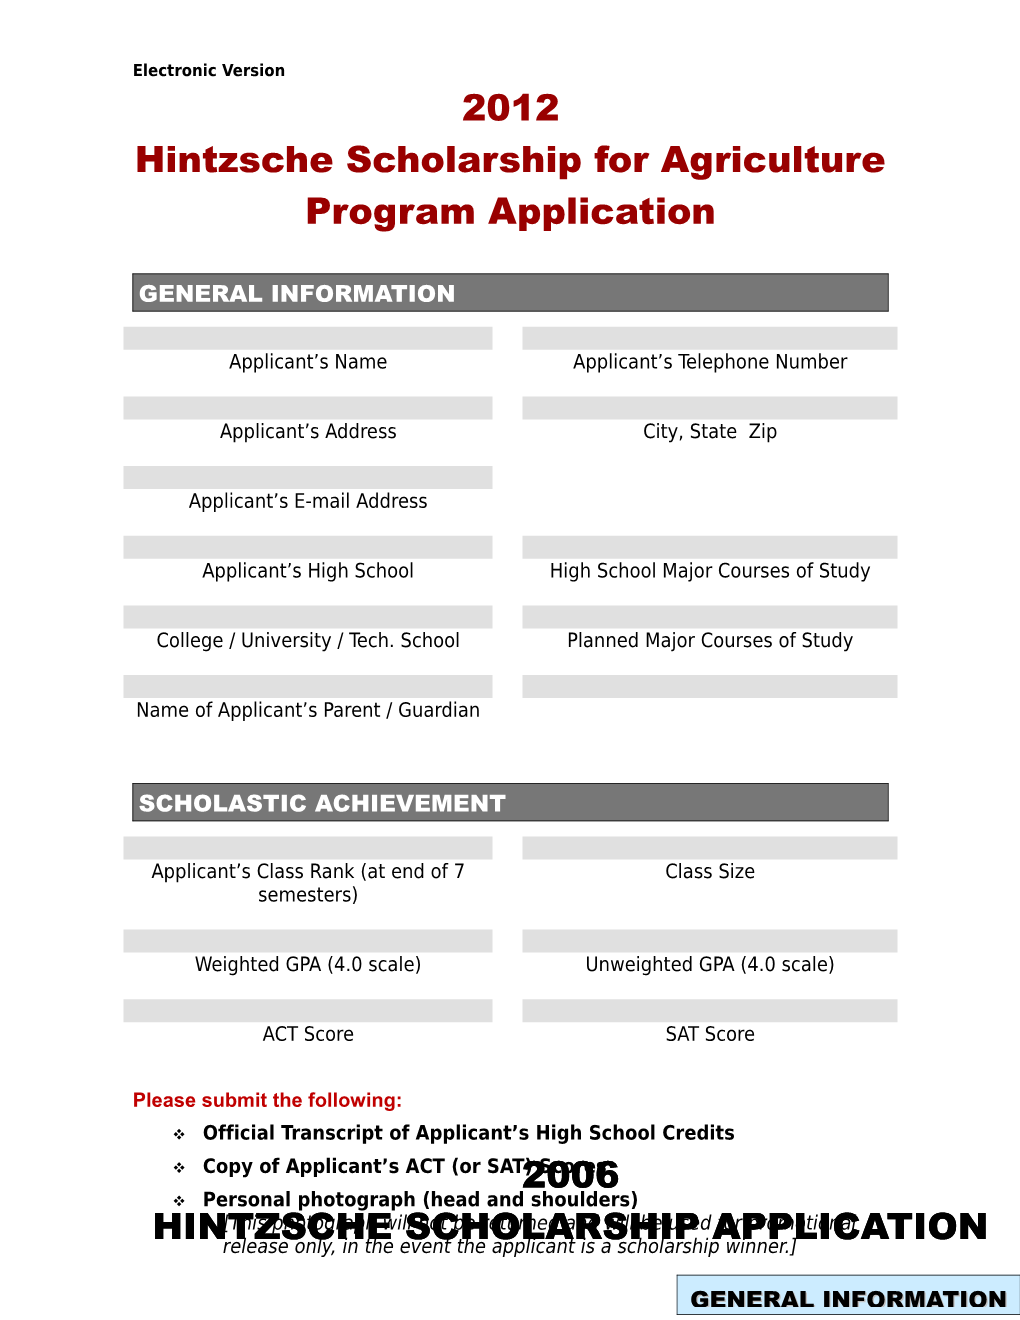 Hintzsche Scholarship for Agriculture